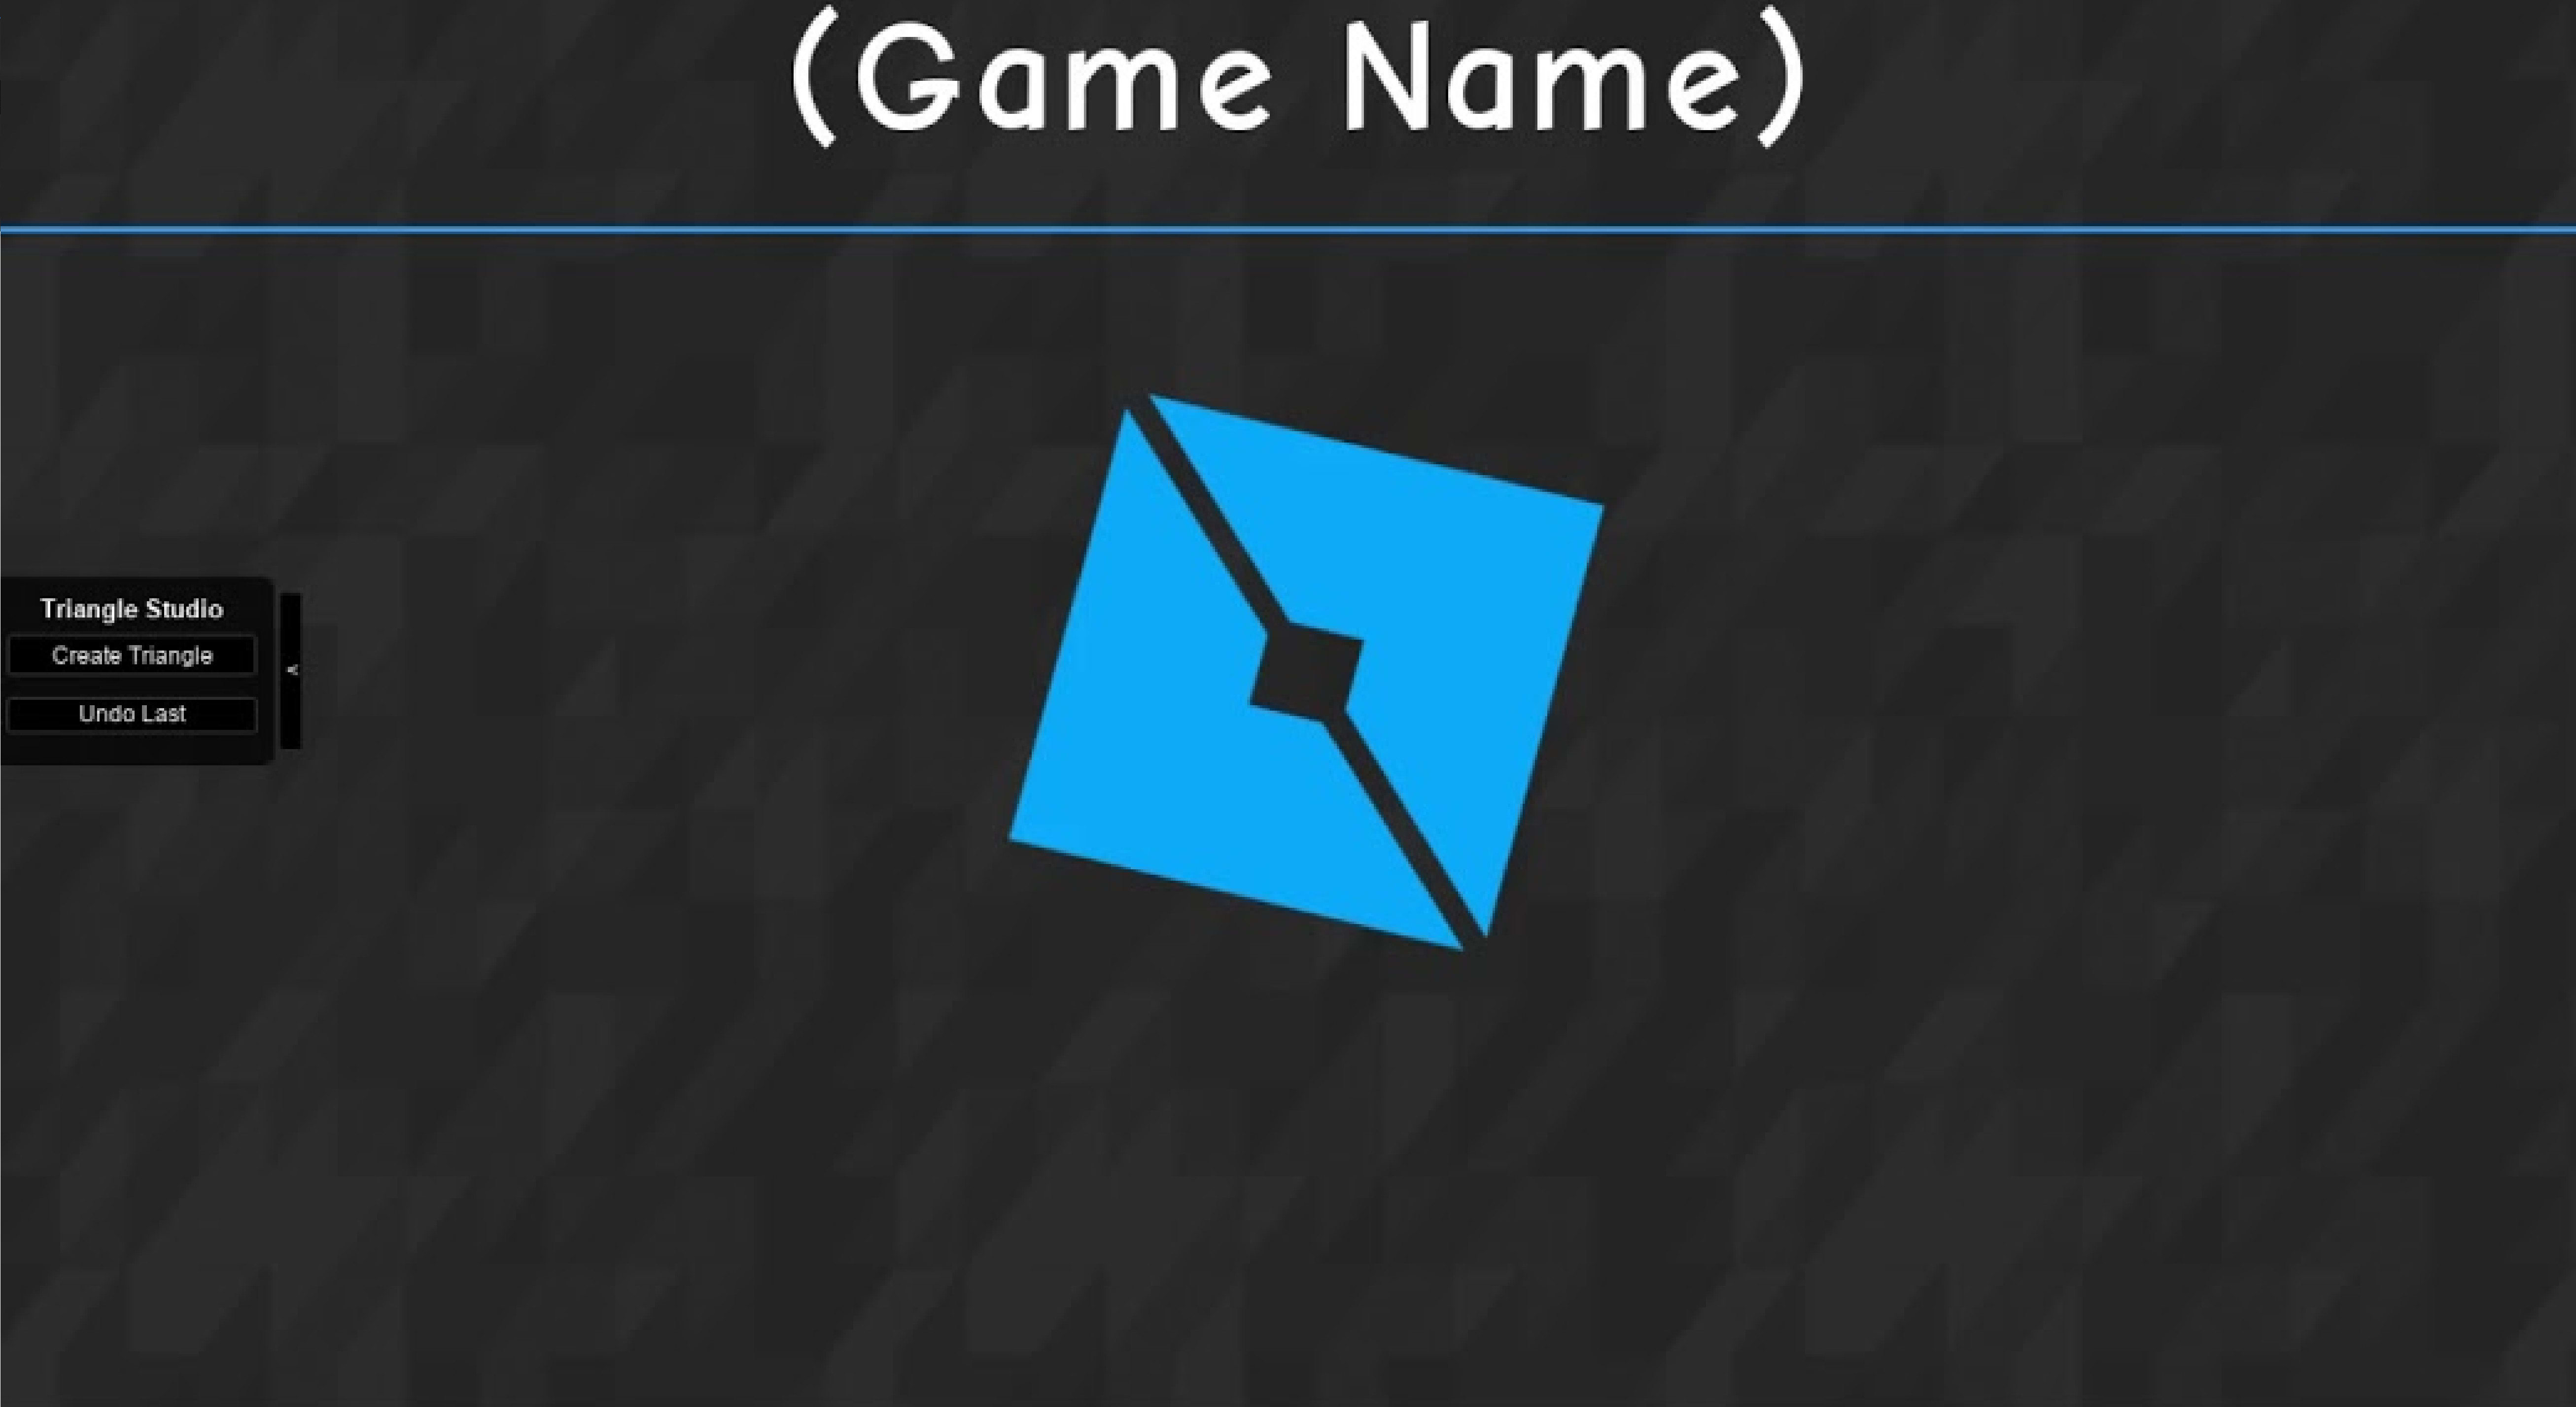 Script You A Homescreen Gui For Your Roblox Game By Kiarashgaming Fiverr - roblox gui for games